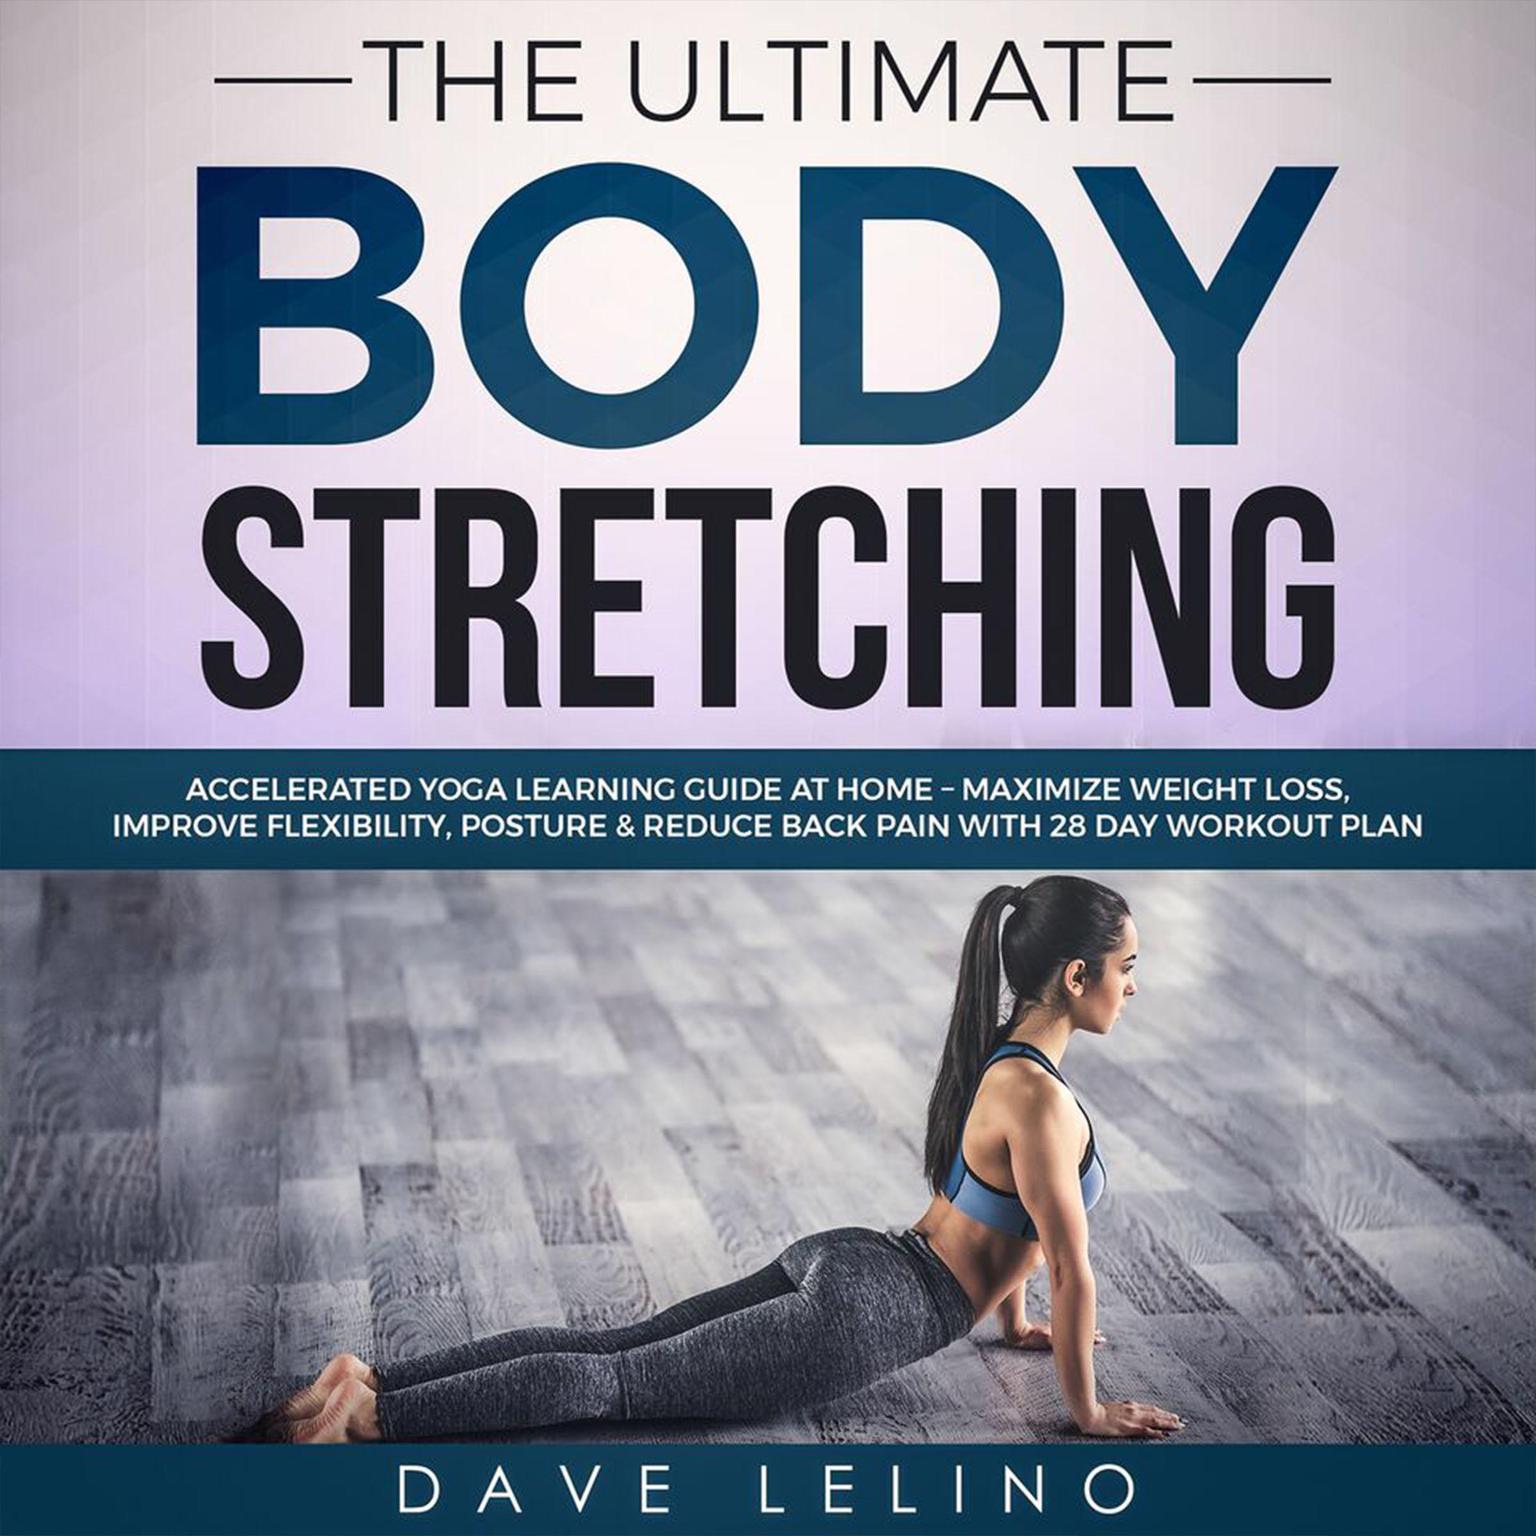 The Ultimate Body Stretching: Accelerated Yoga Learning Guide at Home – Maximize Weight Loss, Improve Flexibility, Posture & Reduce Back Pain with 28 Day Workout Plan Audiobook, by Dave LeLino